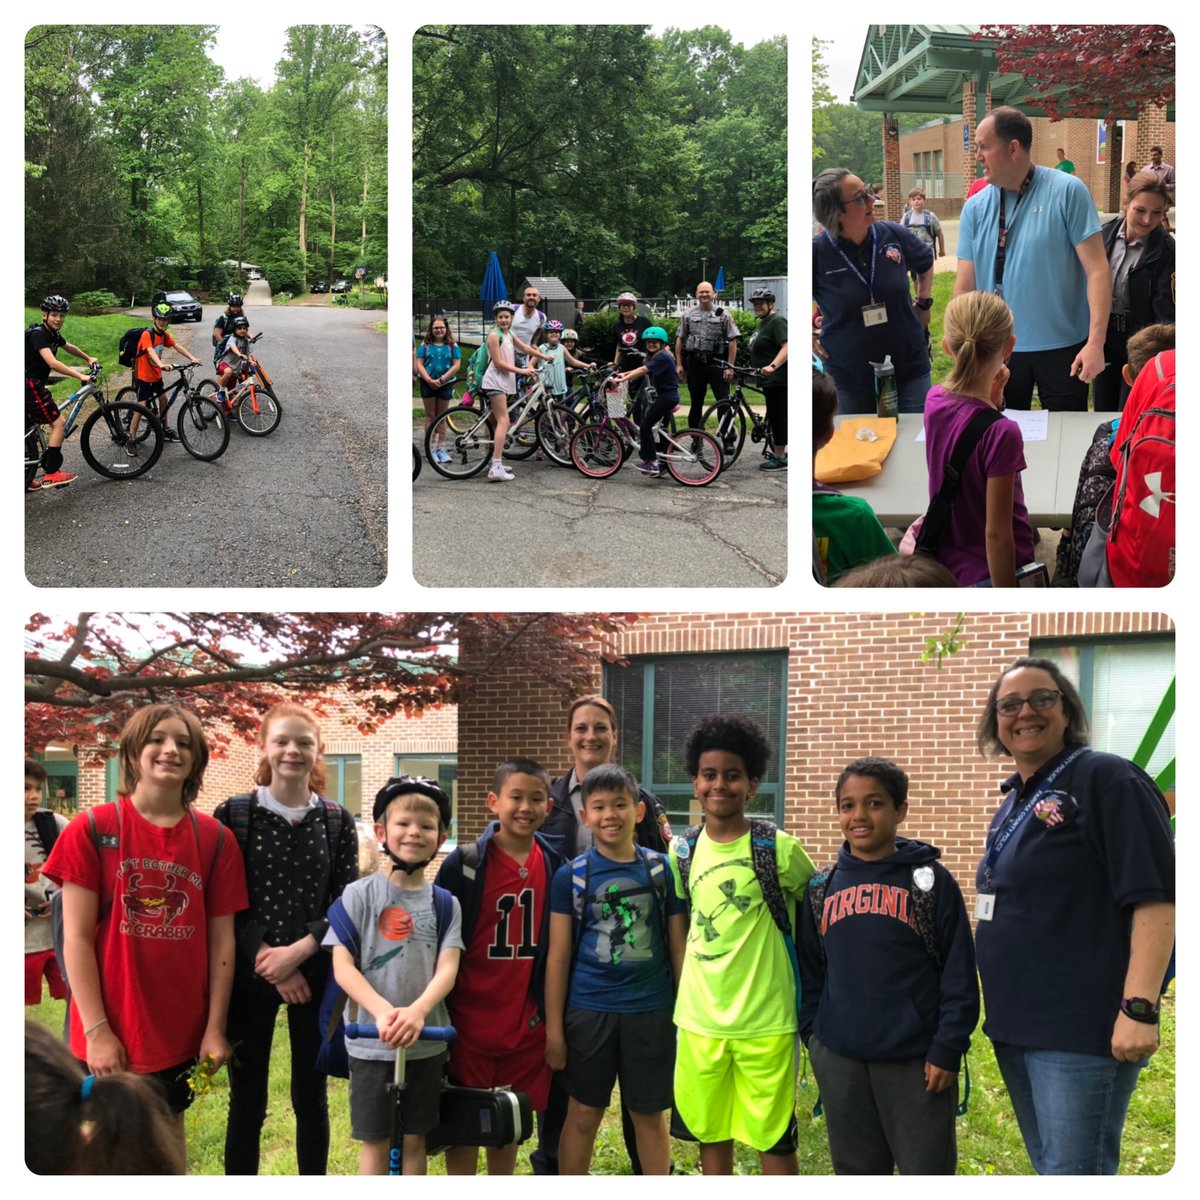 Thank you to @FairfaxCountyPD for supporting our #nationalbiketoschoolday @HuntersWoodsES. Several officers from the Reston station joined us this morning. #OurFCPS